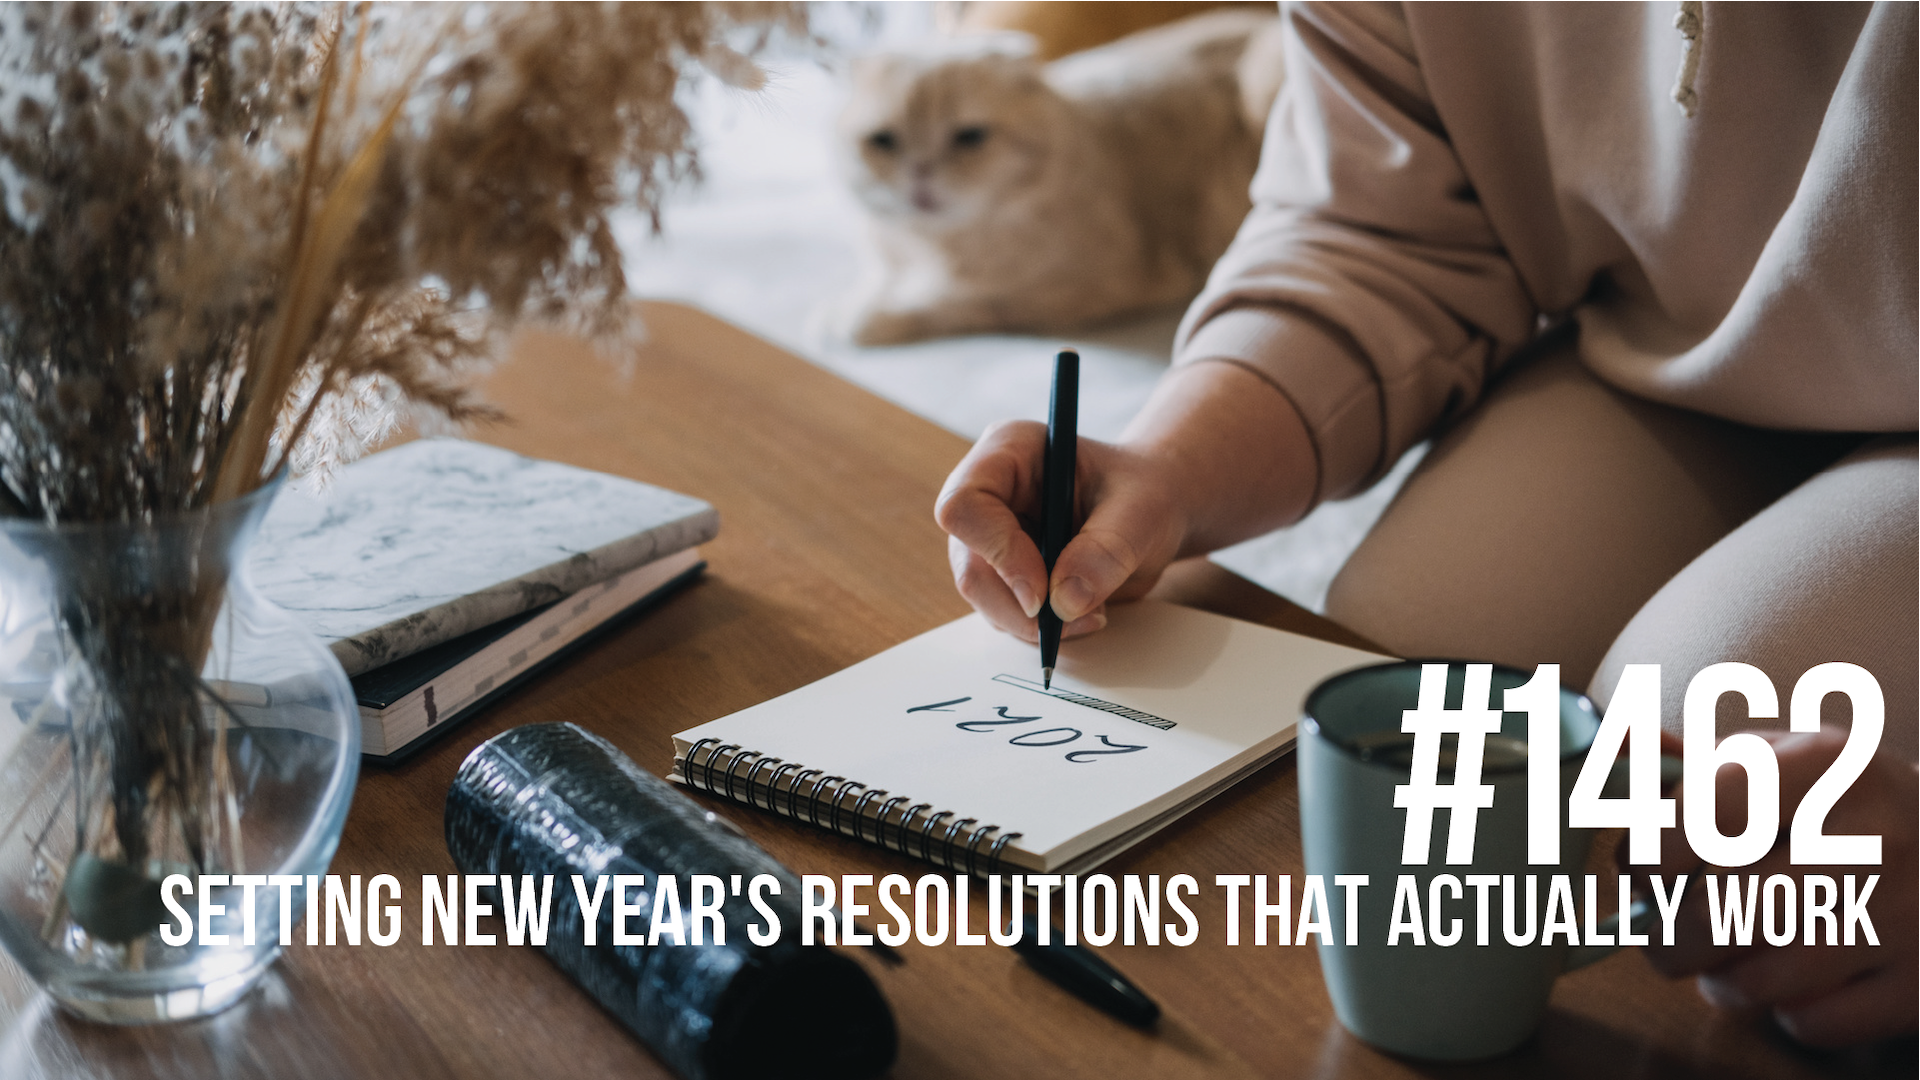 1462: Setting New Year’s Resolutions That Actually Work